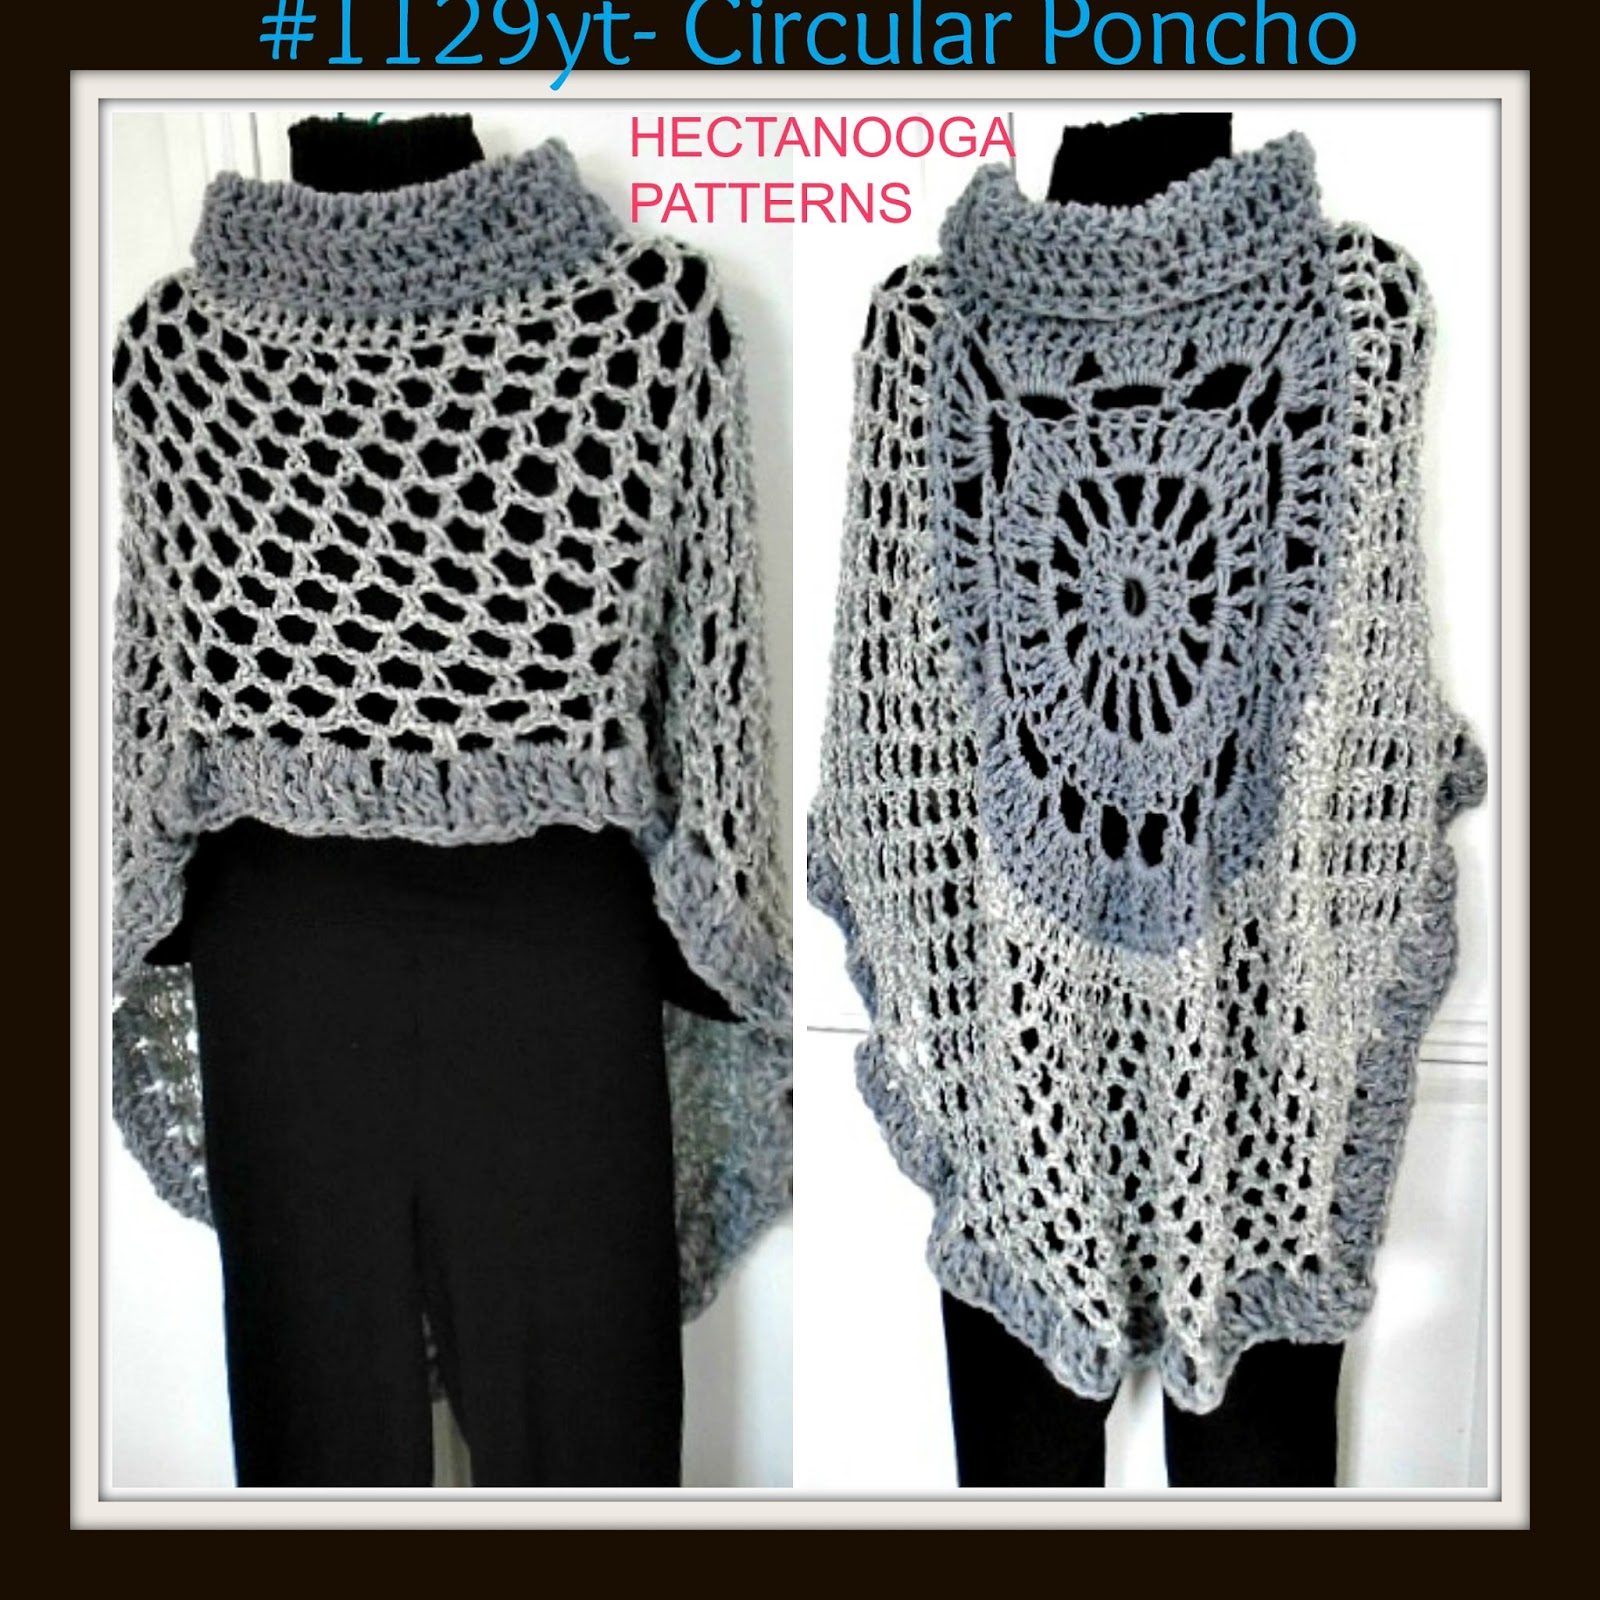 Free Crochet Patterns For Ponchos Hectanooga Patterns Free Crochet Pattern Asymmetrical Circular